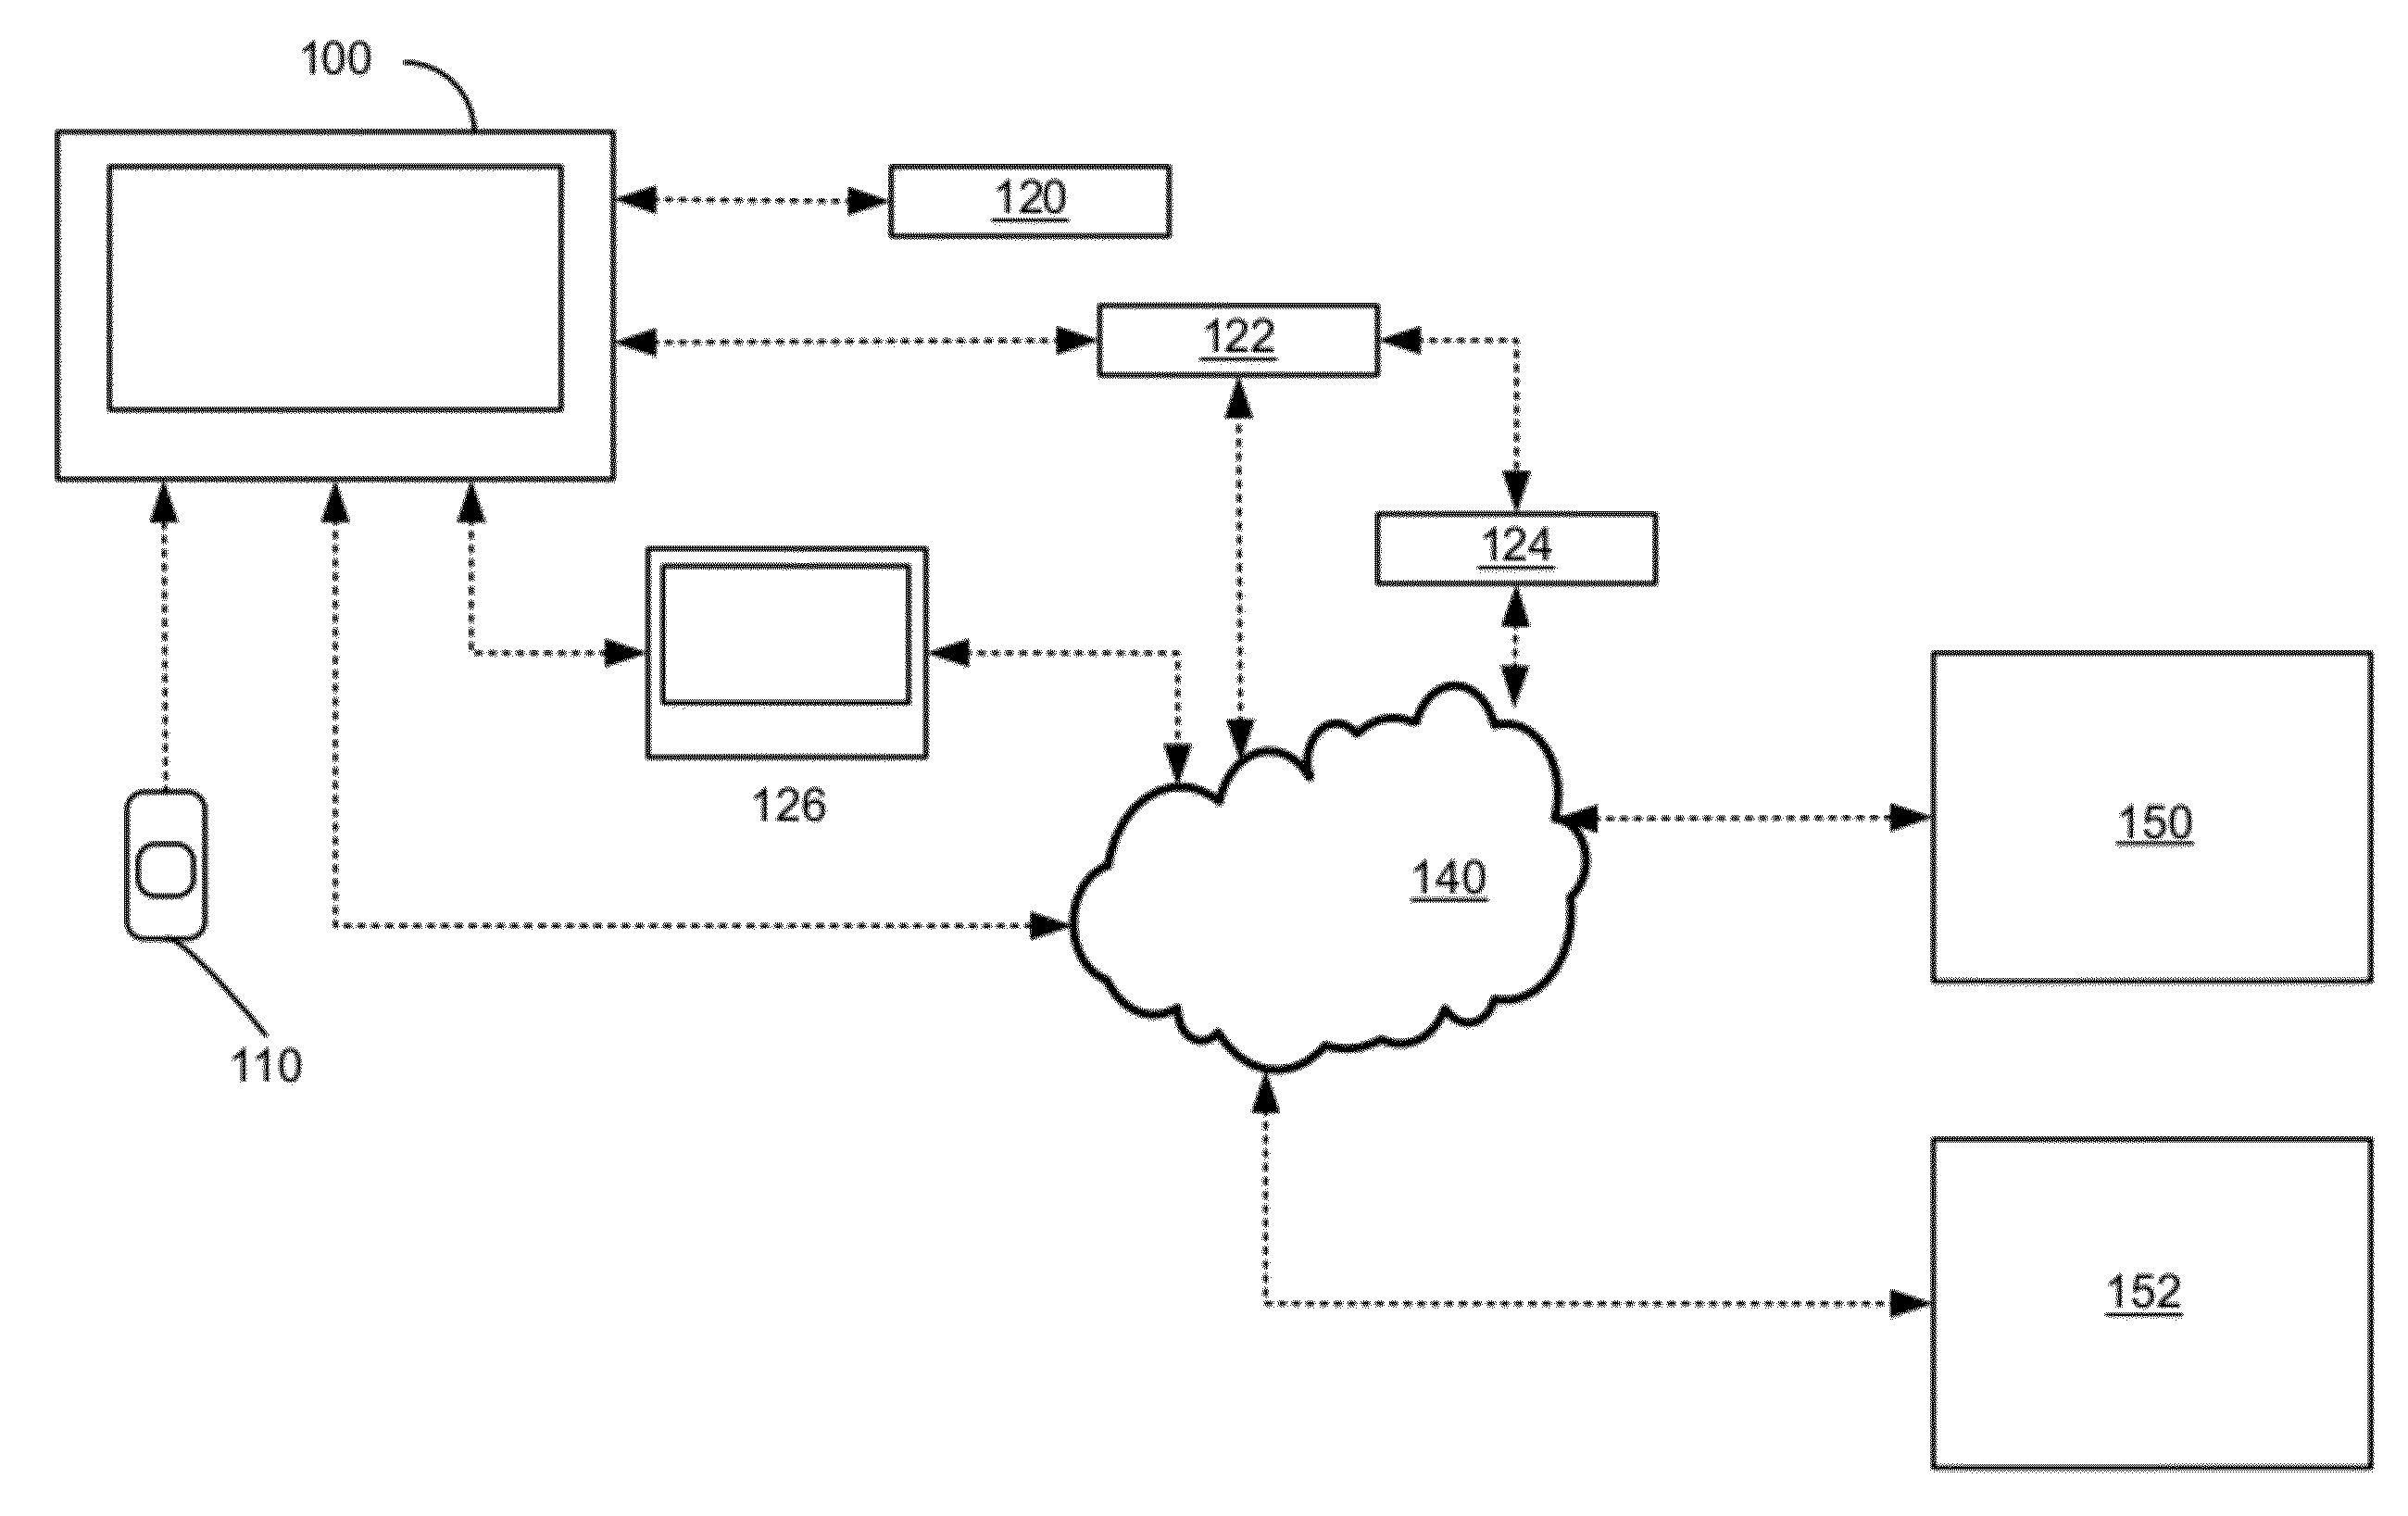 Remote control system for connected devices